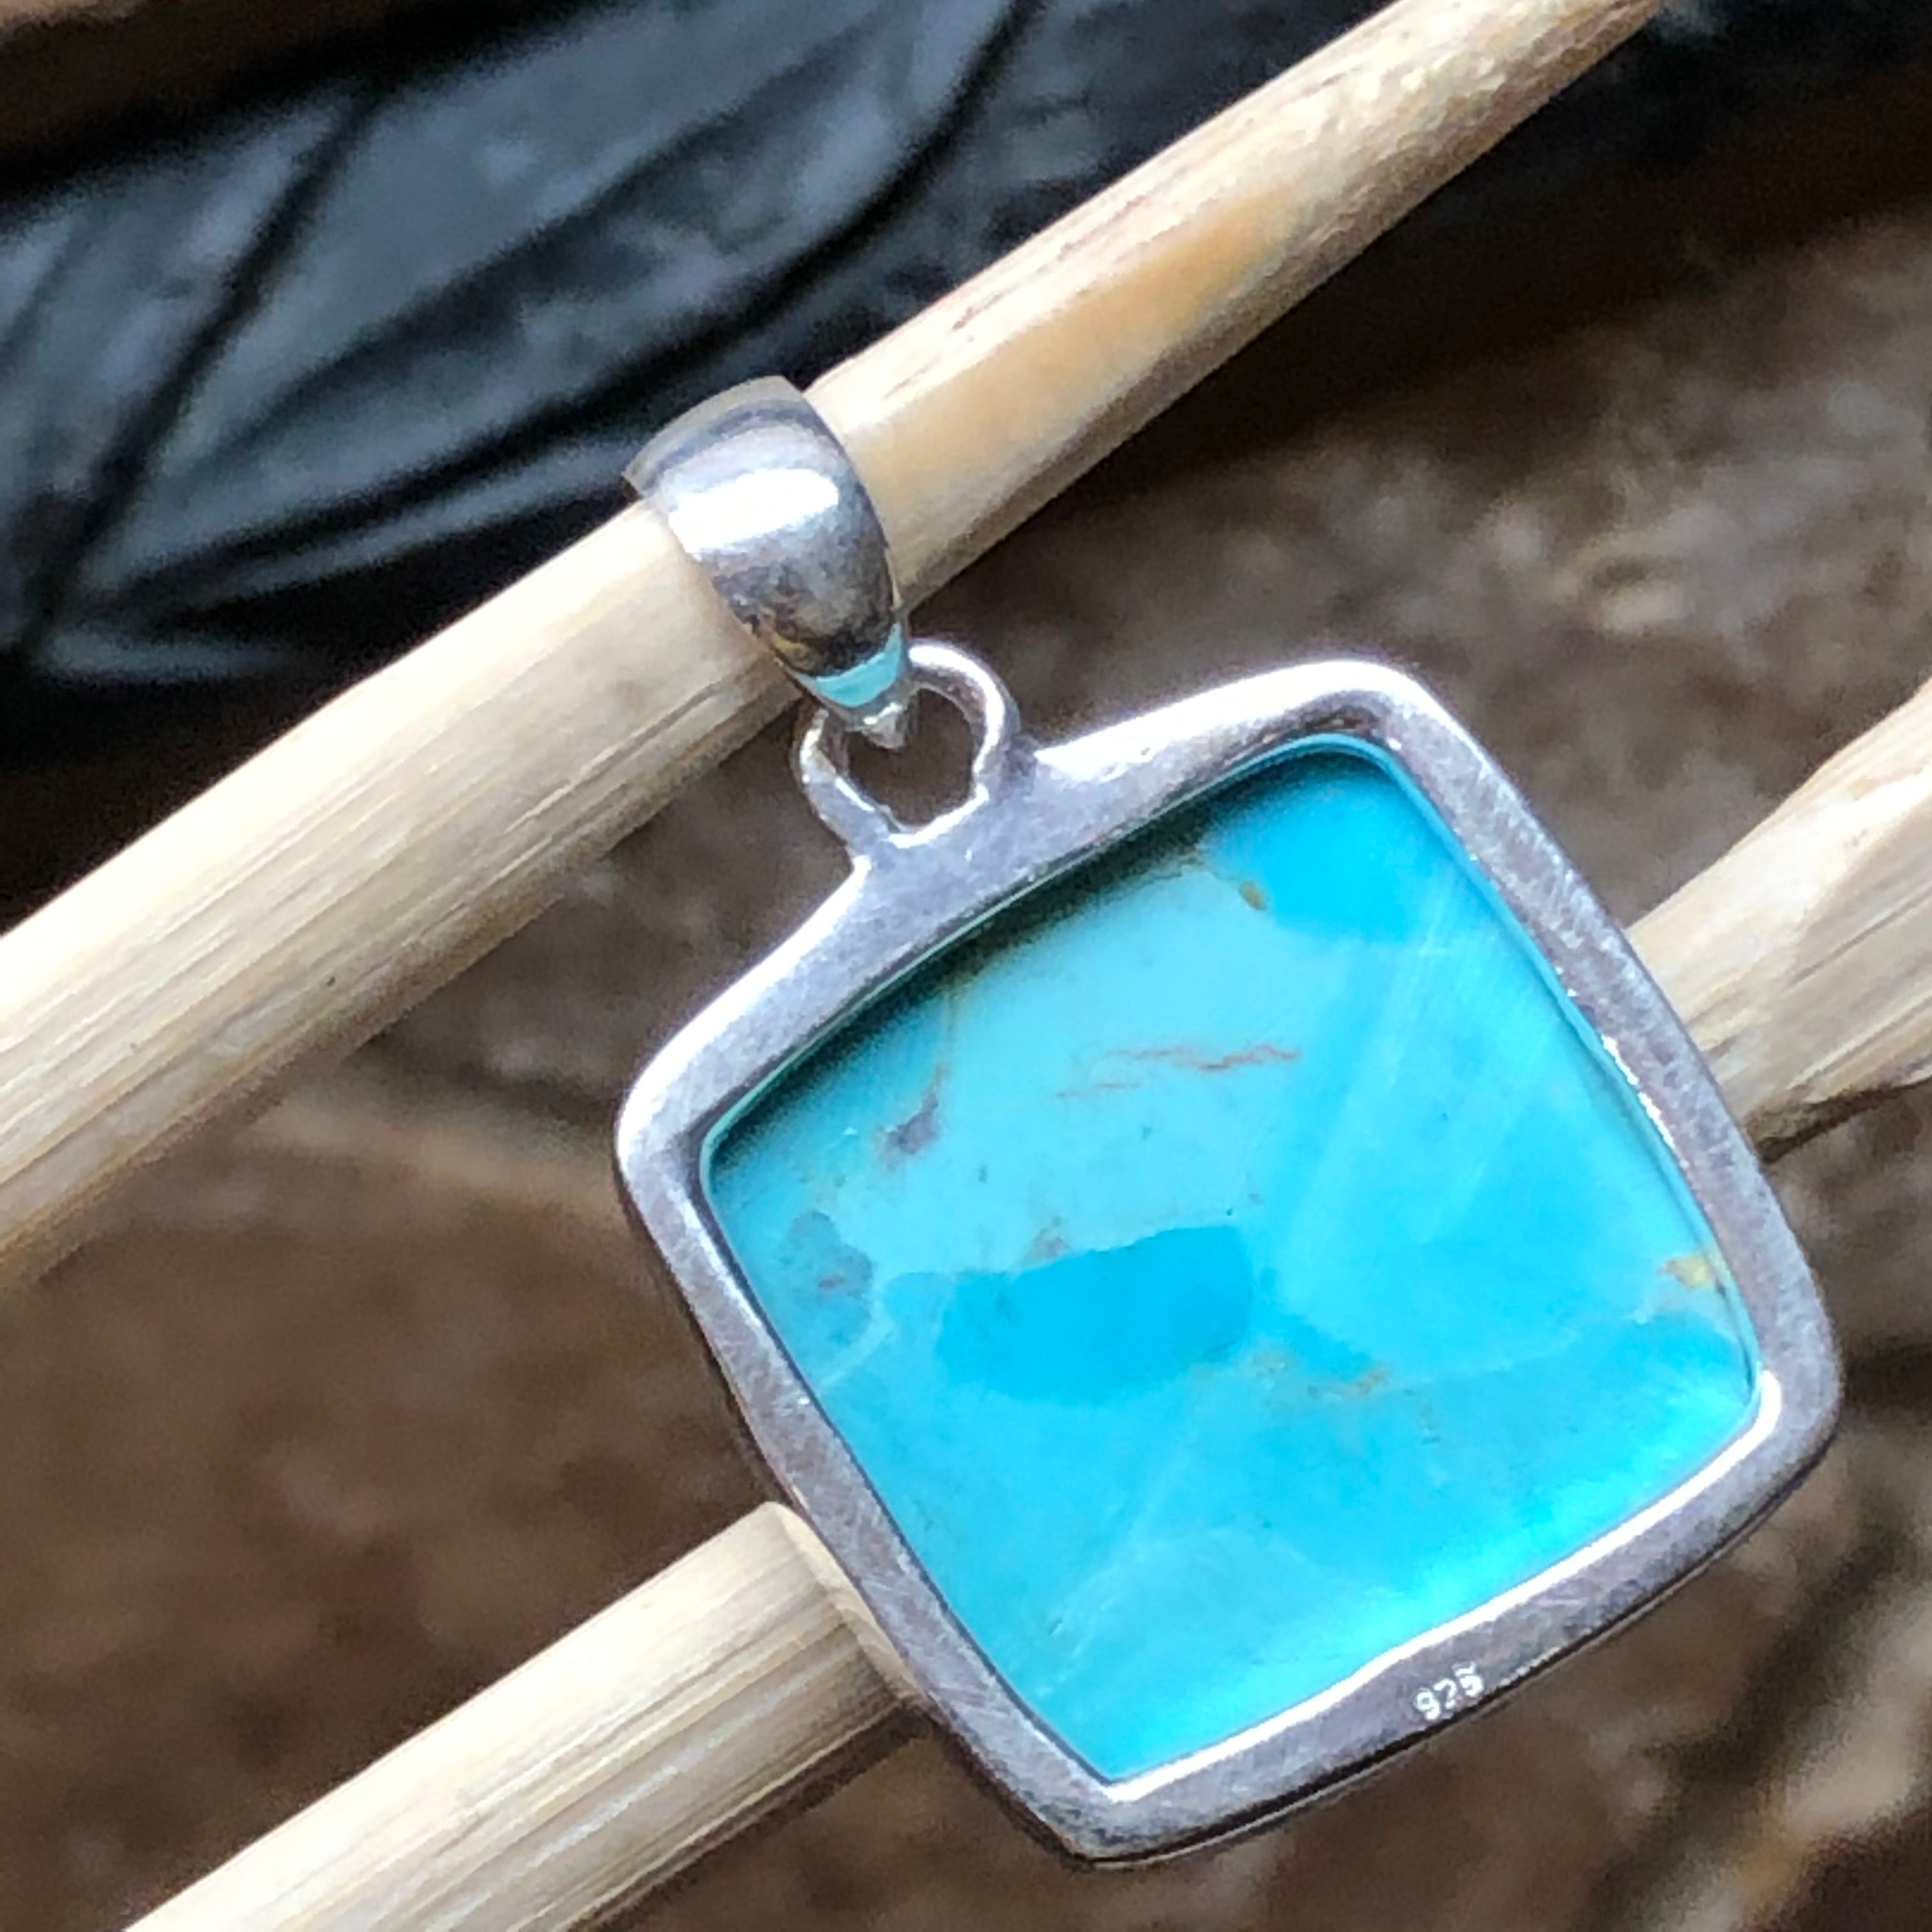 Blue Mohave Turquoise 925 Solid Sterling Silver Pendant 30mm - Natural Rocks by Kala